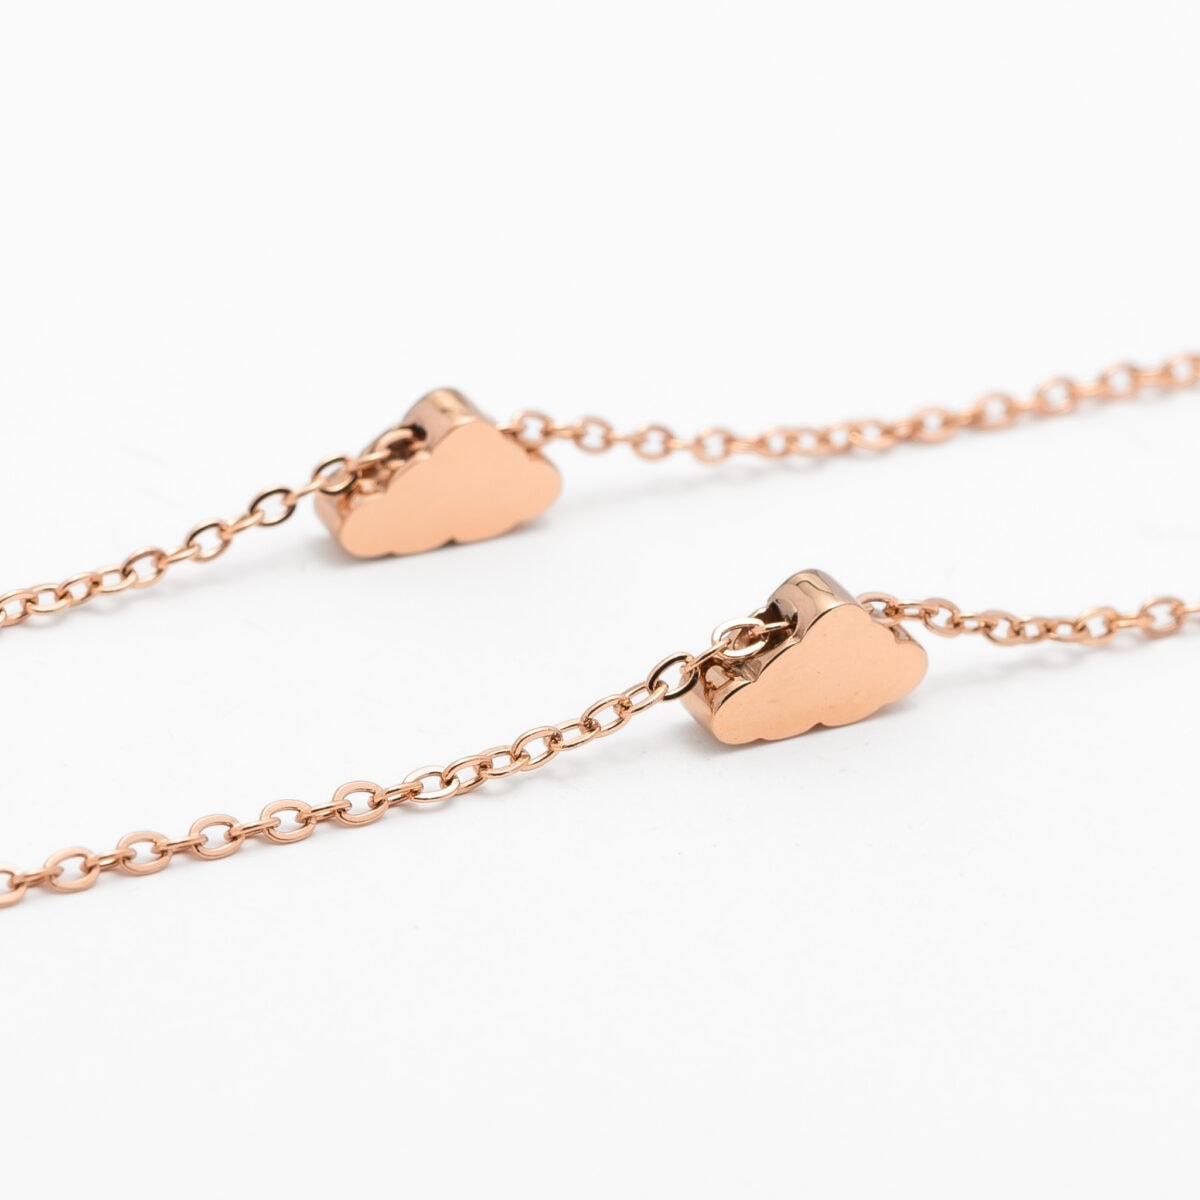 https://m.clubbella.co/product/volare-cloud-rose-gold-charm-bracelet/ VOlare Cloud Rose Gold Charm (2)